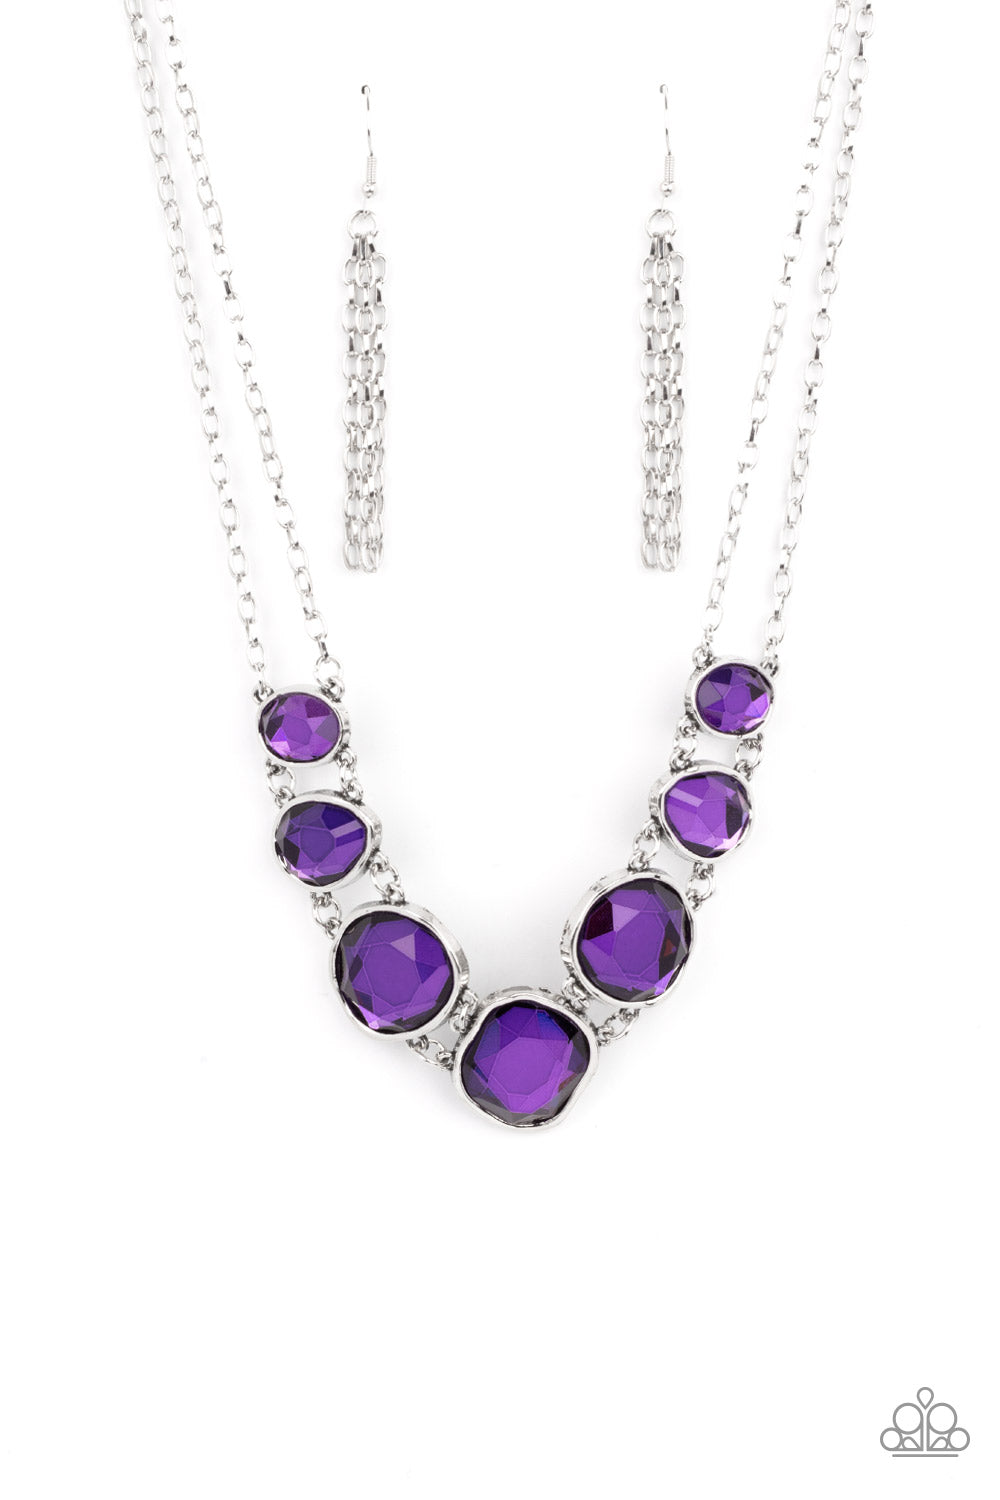 Absolute Admiration - Purple necklace 1718